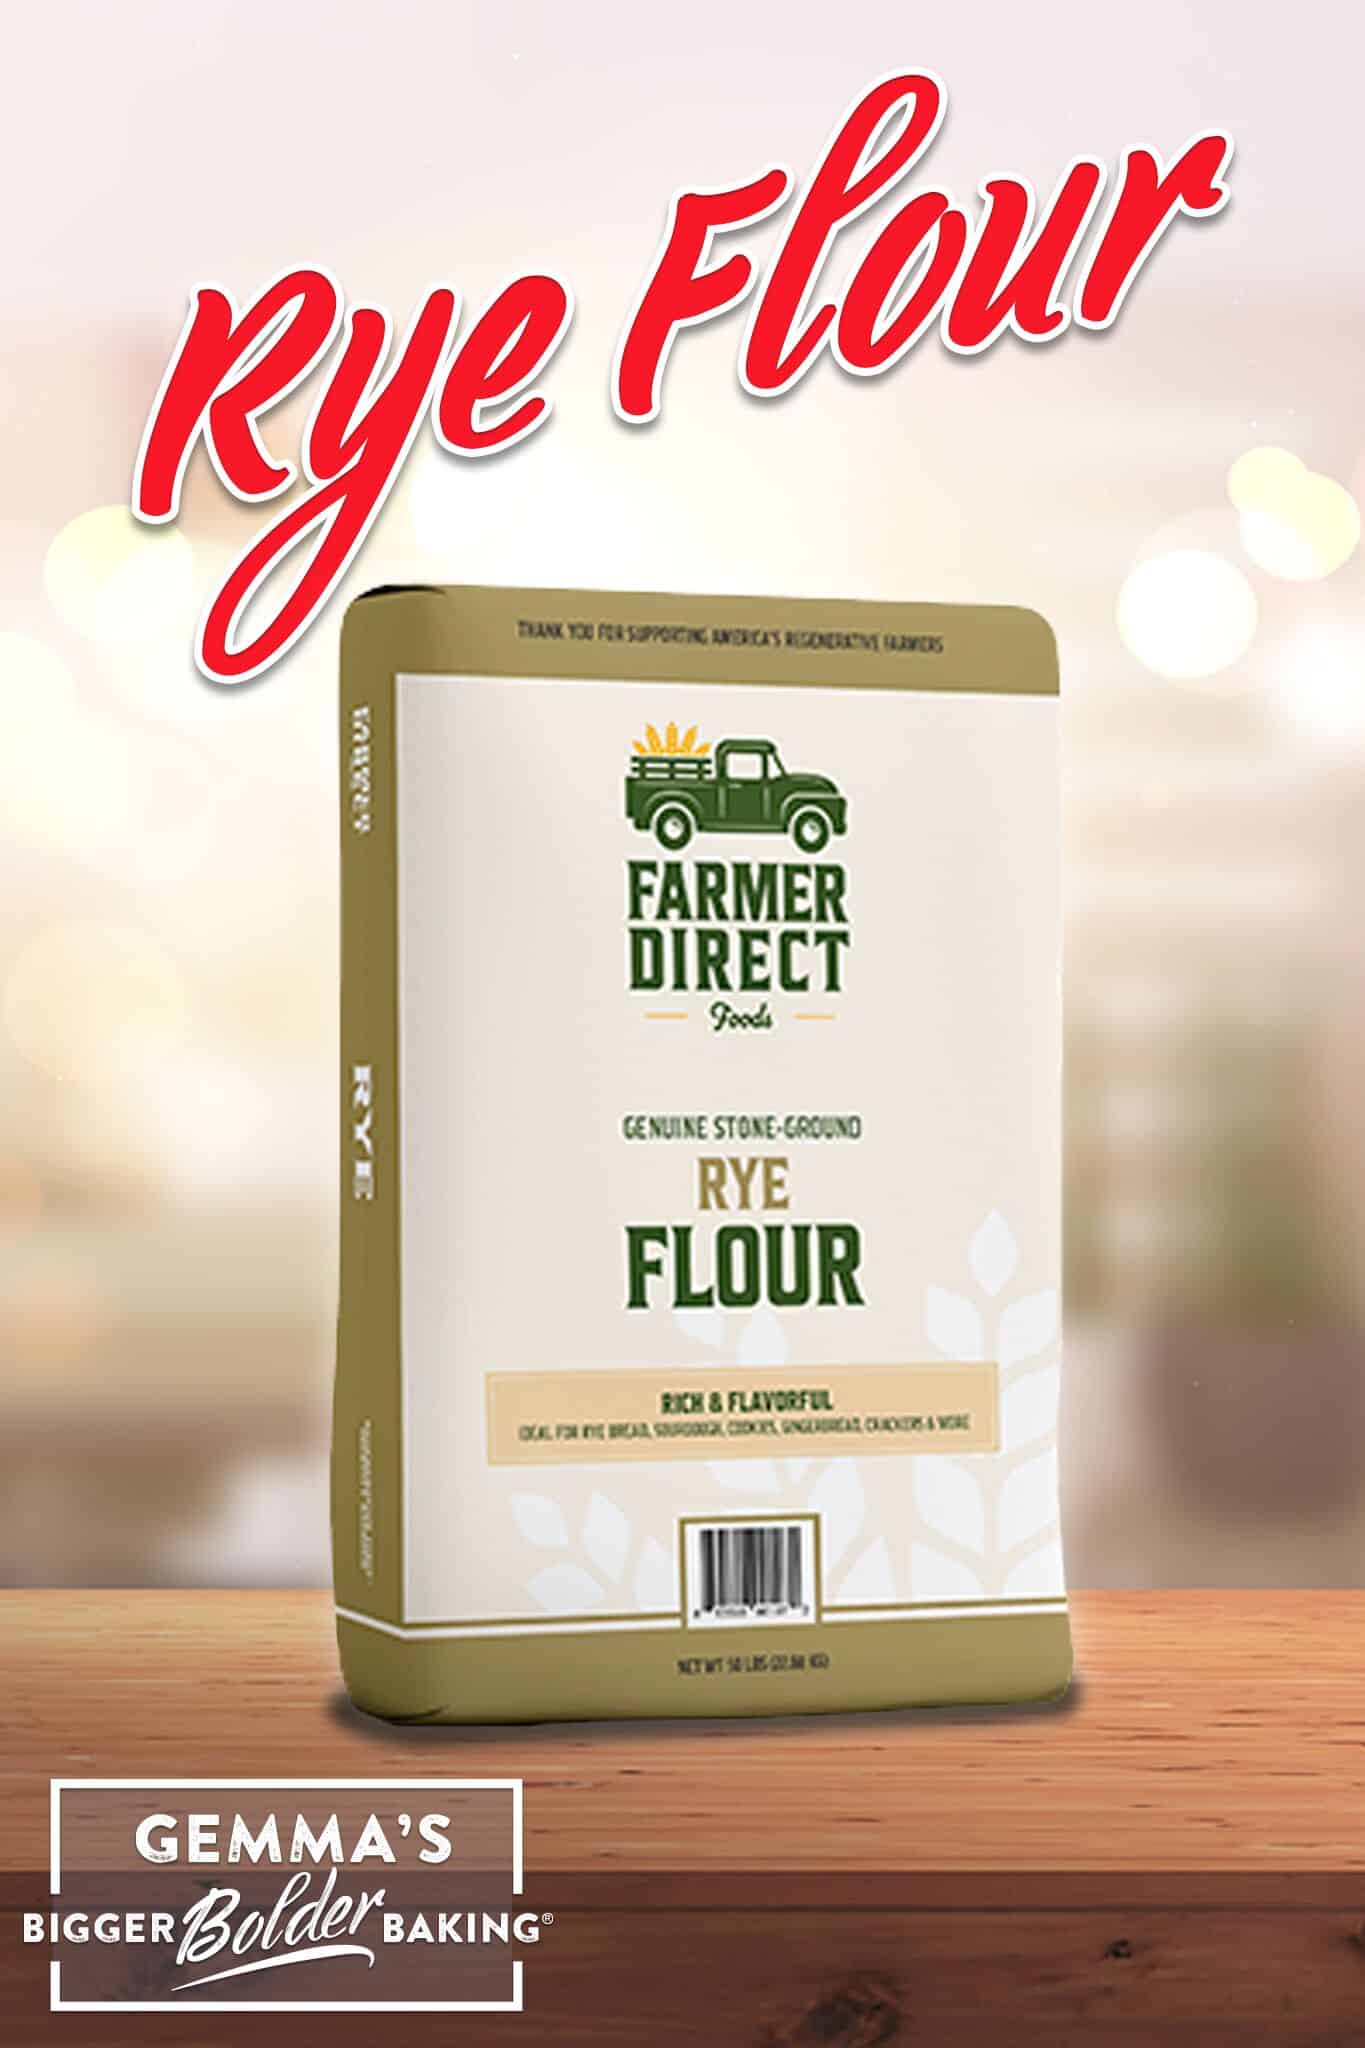 Ultimate Guide to 10 Types of Flour for Baking: Rye Flour, 1)with protein content of 10%-15%, 2)nutty, earthy, slightly sour flavor with a dense texture 3)best for rye breads, sourdoughs, gingerbreads and crackers